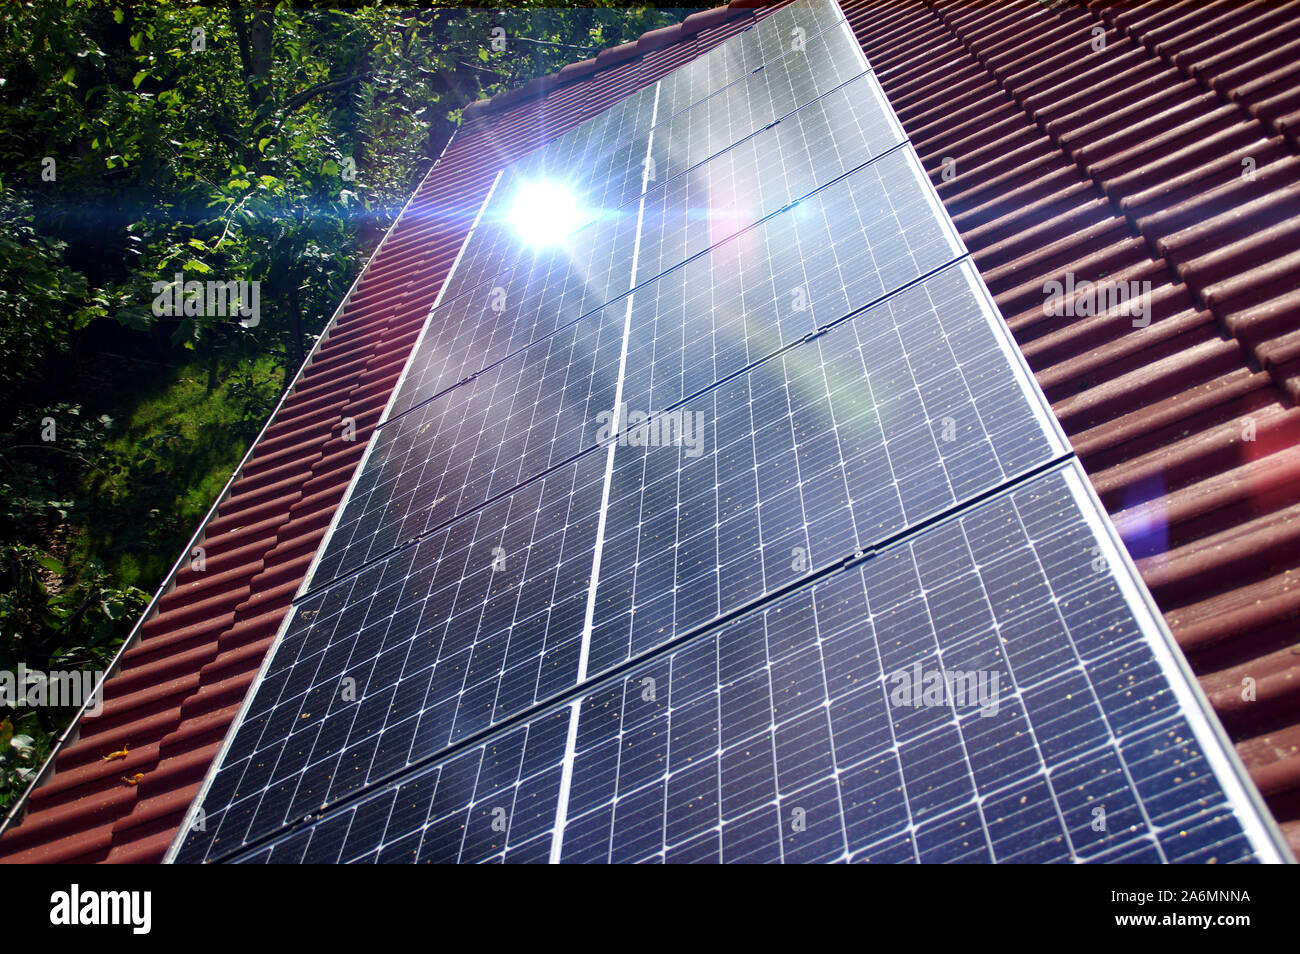 Photovoltaic panels on house roof. Alternative and renewable energy, green power, ecology and solar electricity production. Stock Photo